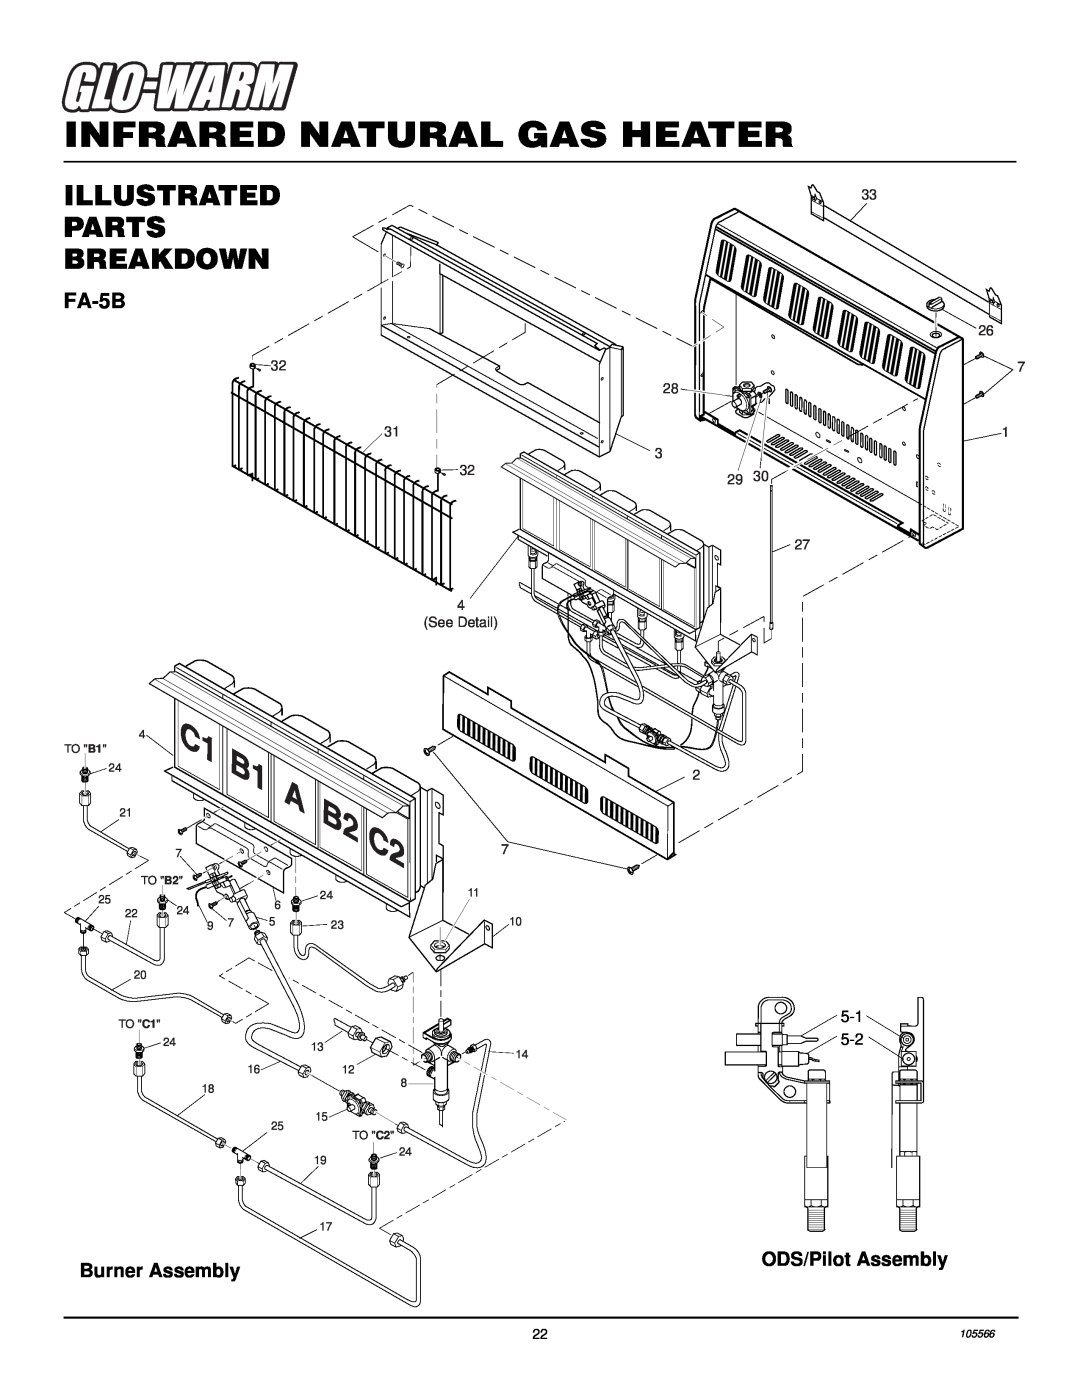 Desa FAS-3C, FA-3B FA-5B, Infrared Natural Gas Heater, Illustrated Parts Breakdown, Burner Assembly, ODS/Pilot Assembly 